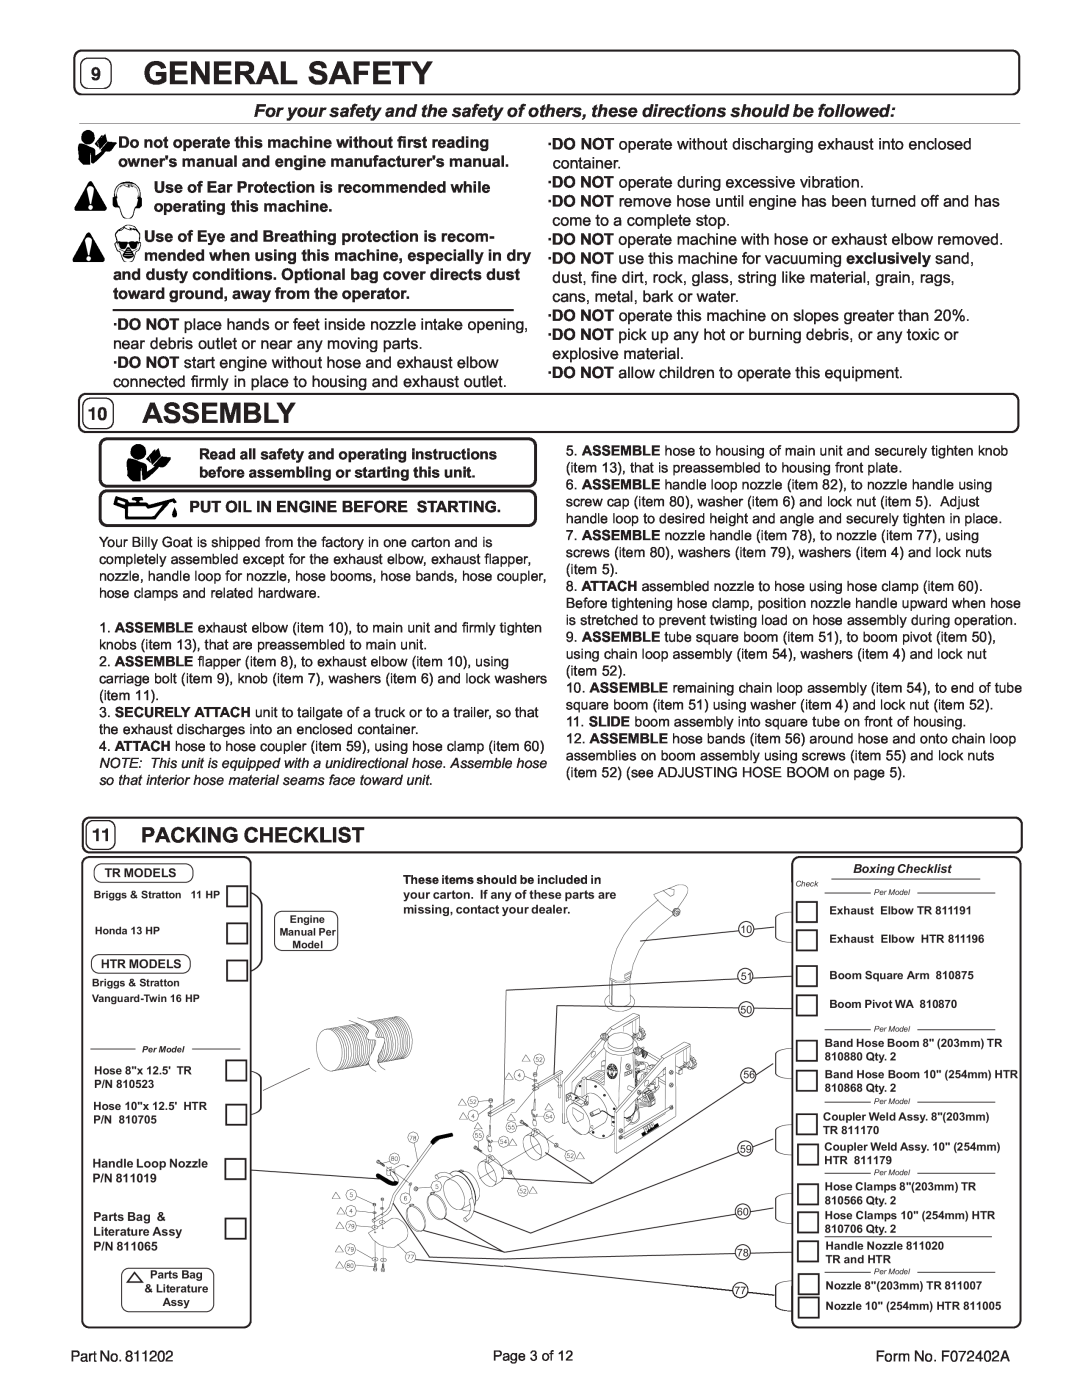 Billy Goat HTR1602V specifications General Safety, Assembly, Packing Checklist 